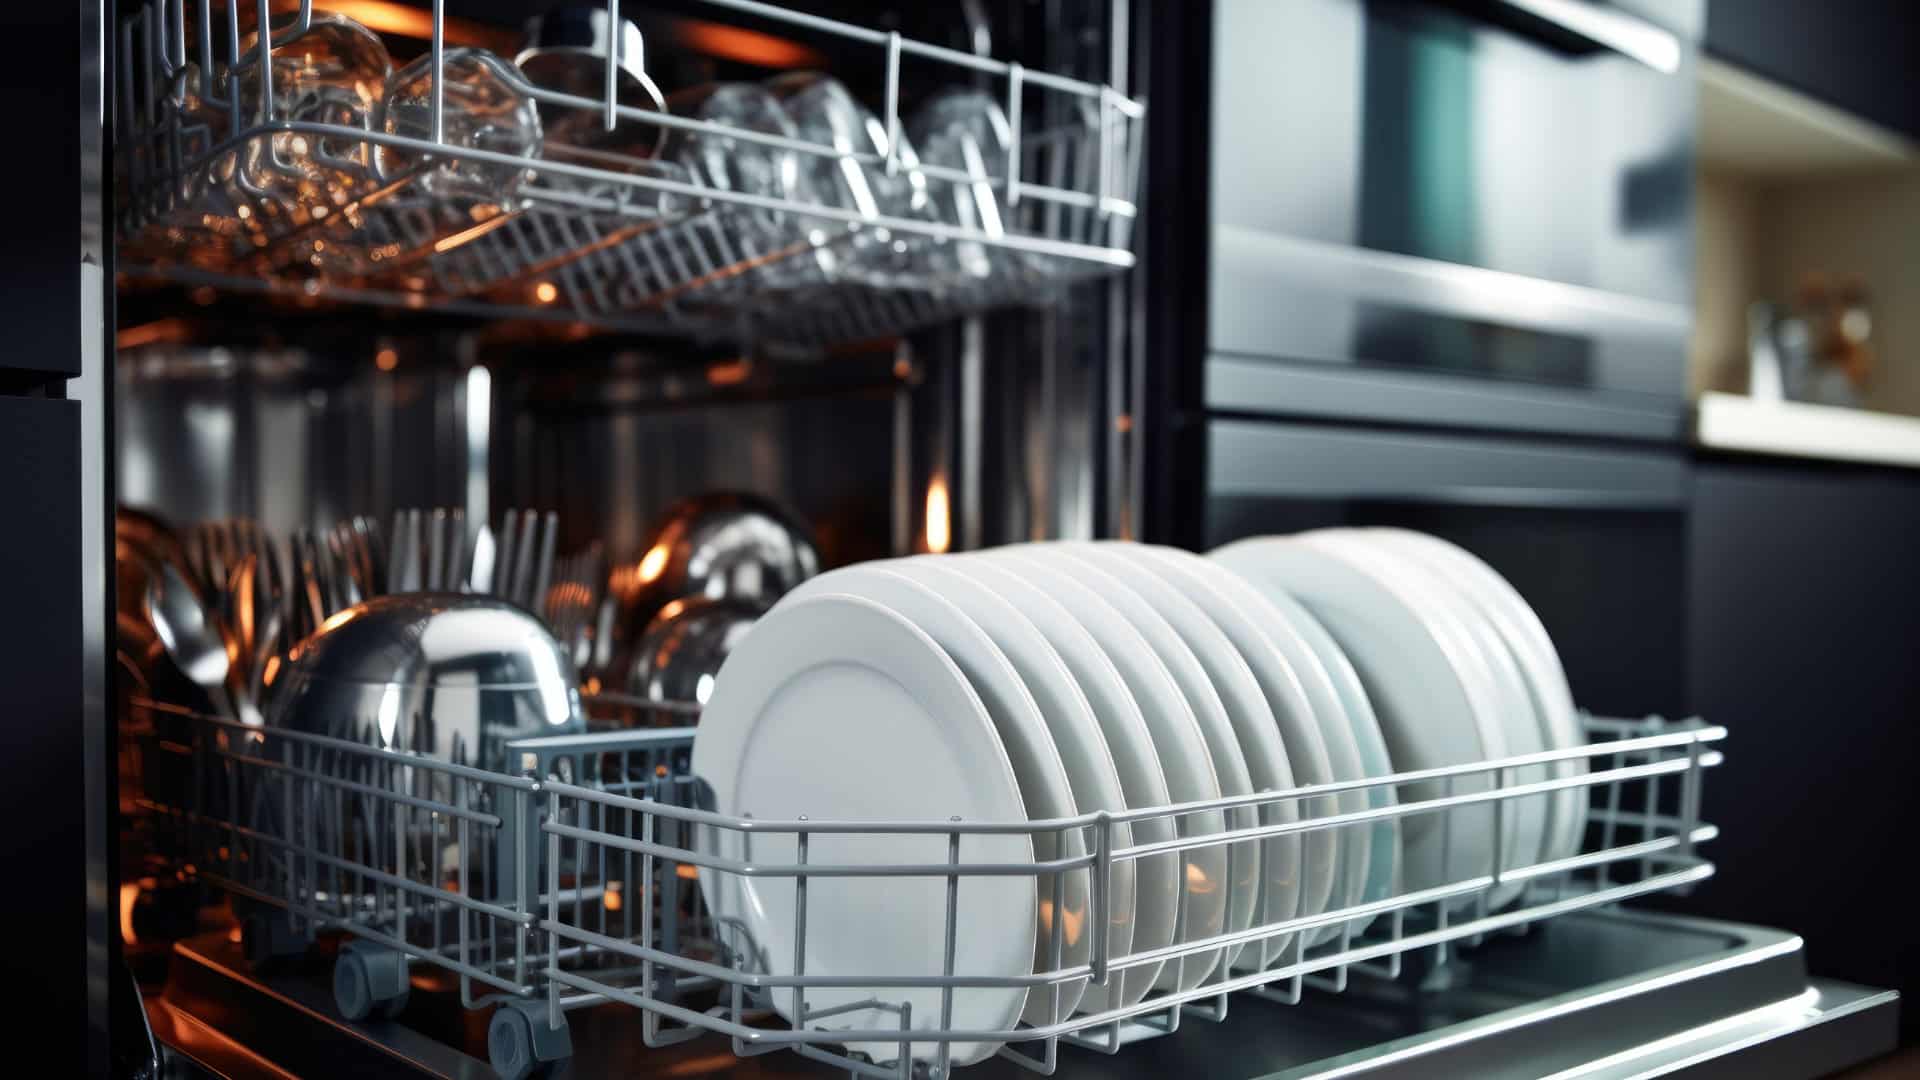 Featured image for “How to Solve Frigidaire Dishwasher Lights Blinking”